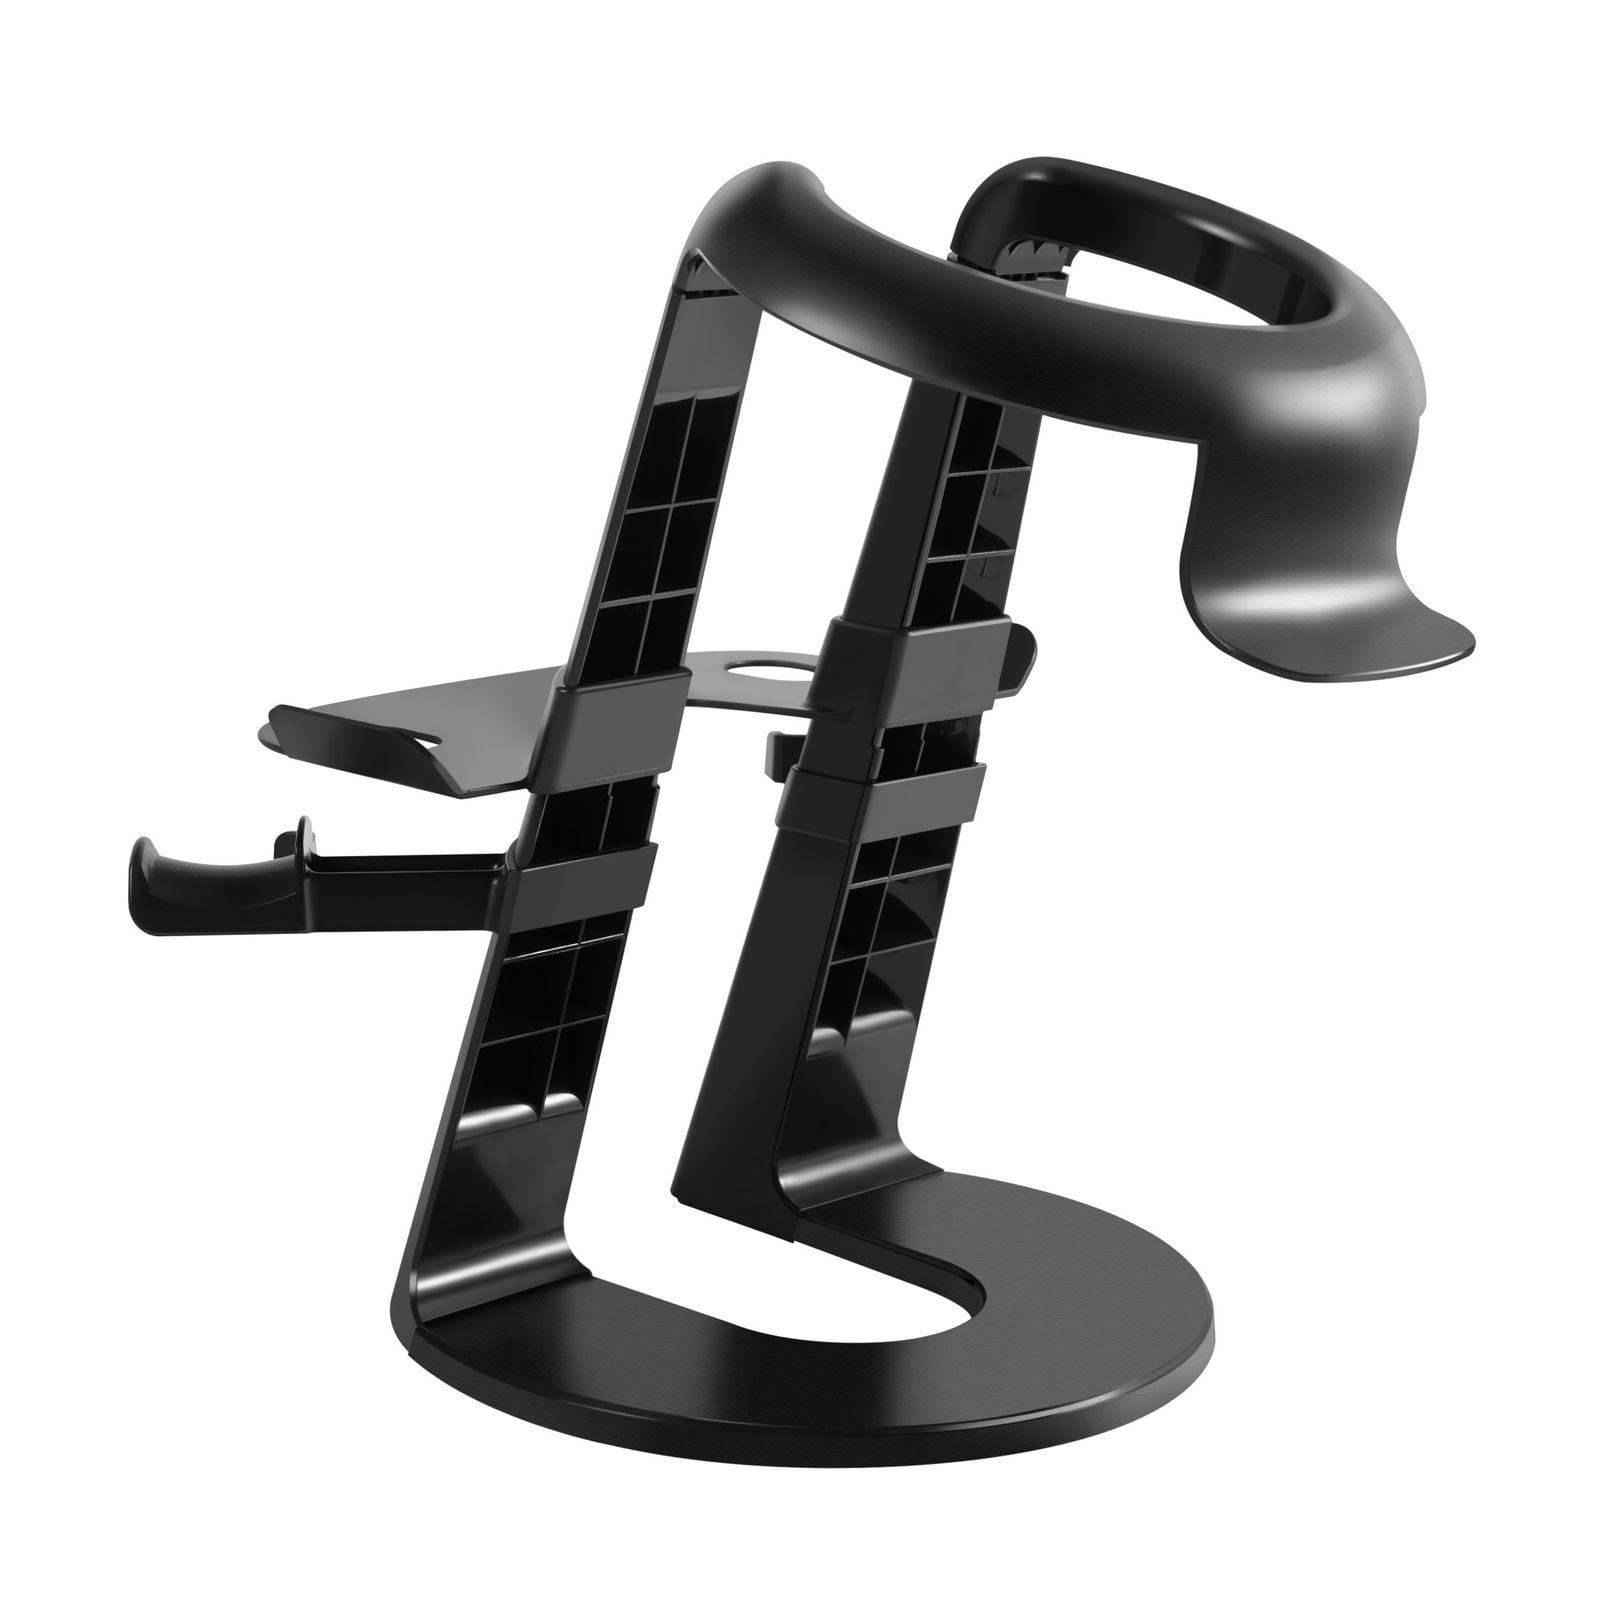 VR Stand Headset Display Holder and Controller Mount Station for Oculus  Quest 2, Quest 1, Rift, Rift S Headset and Touch Controllers by Insten